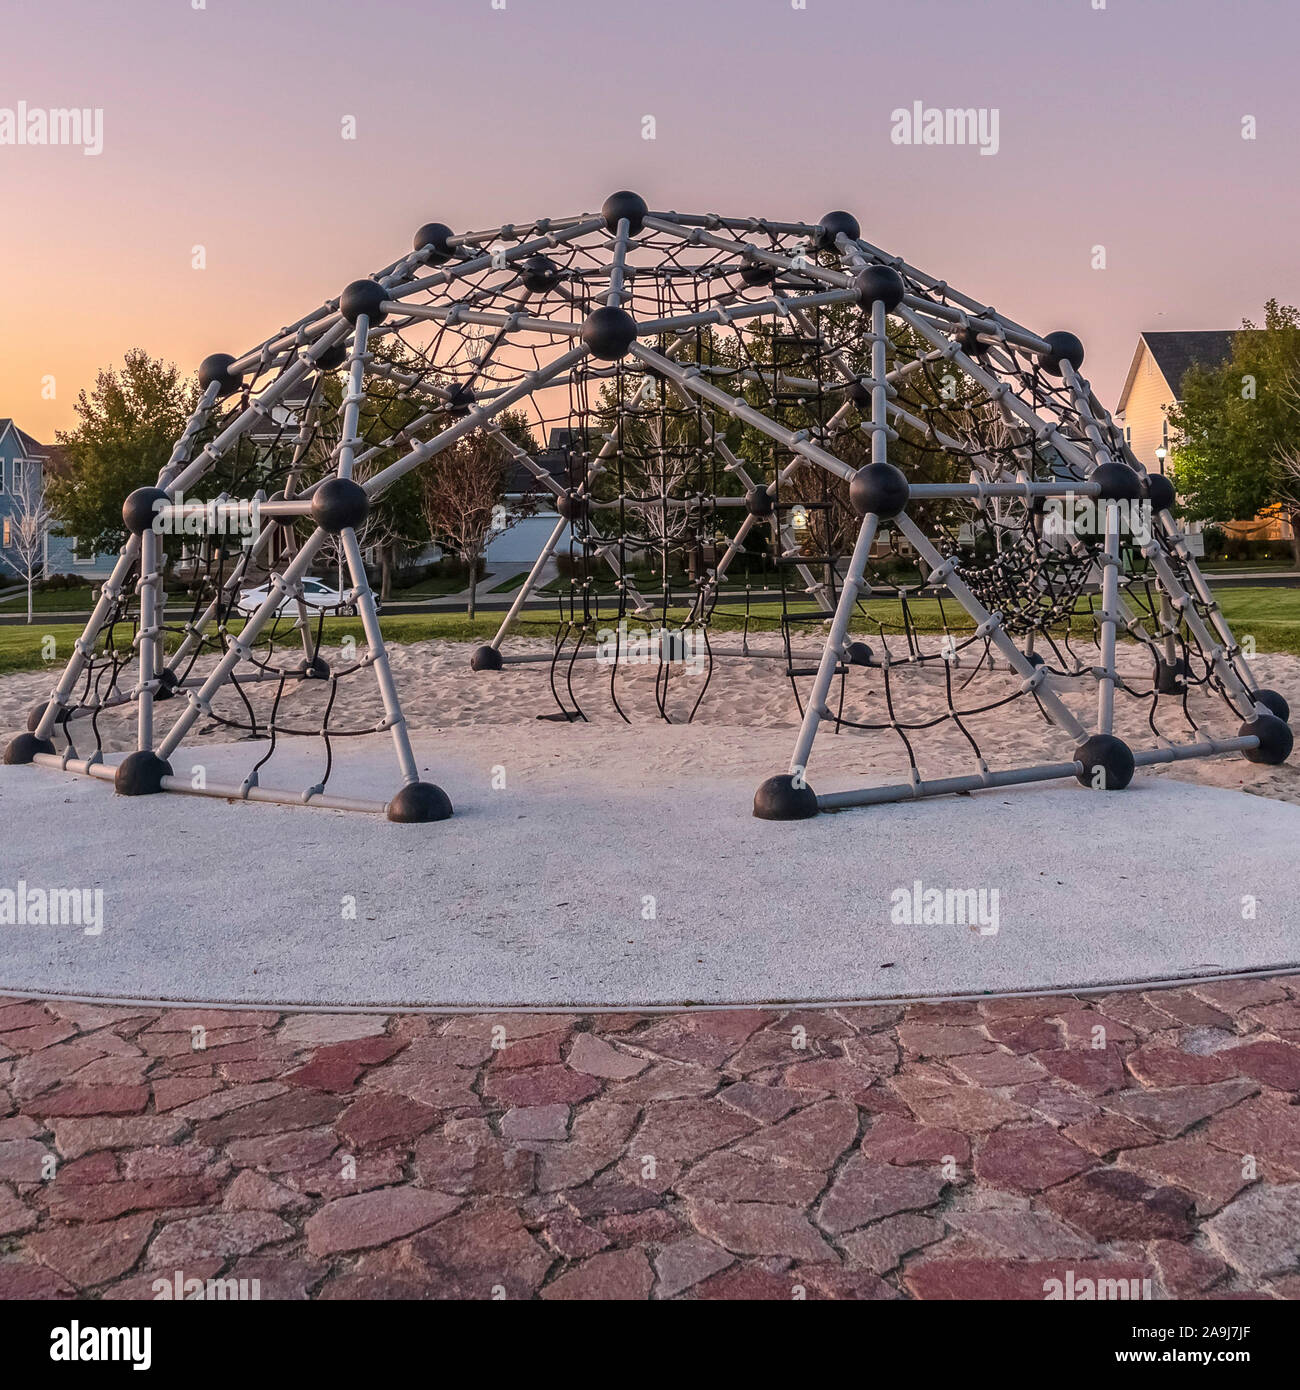 Square Metal climbing frame in a playground at sunset Stock Photo - Alamy